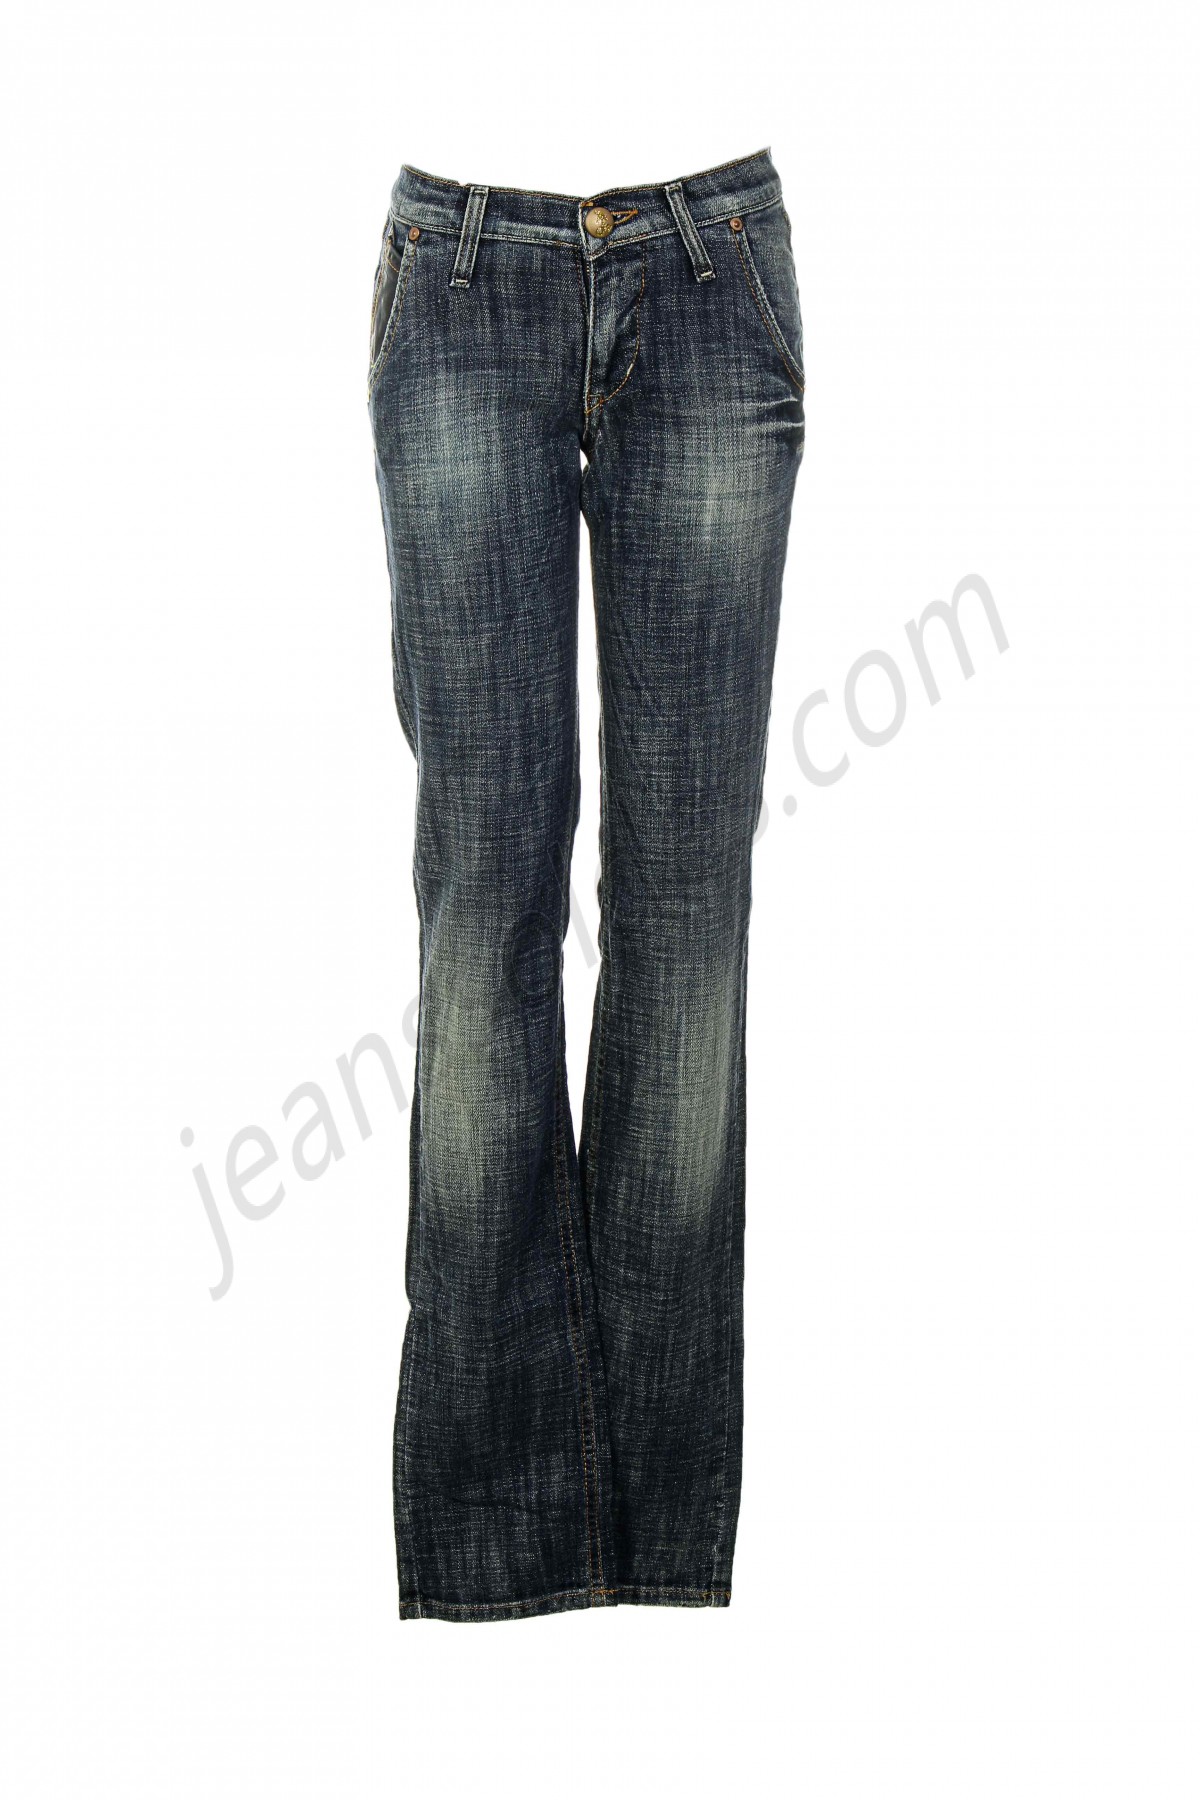 take two-Jeans coupe droite prix d’amis - -0